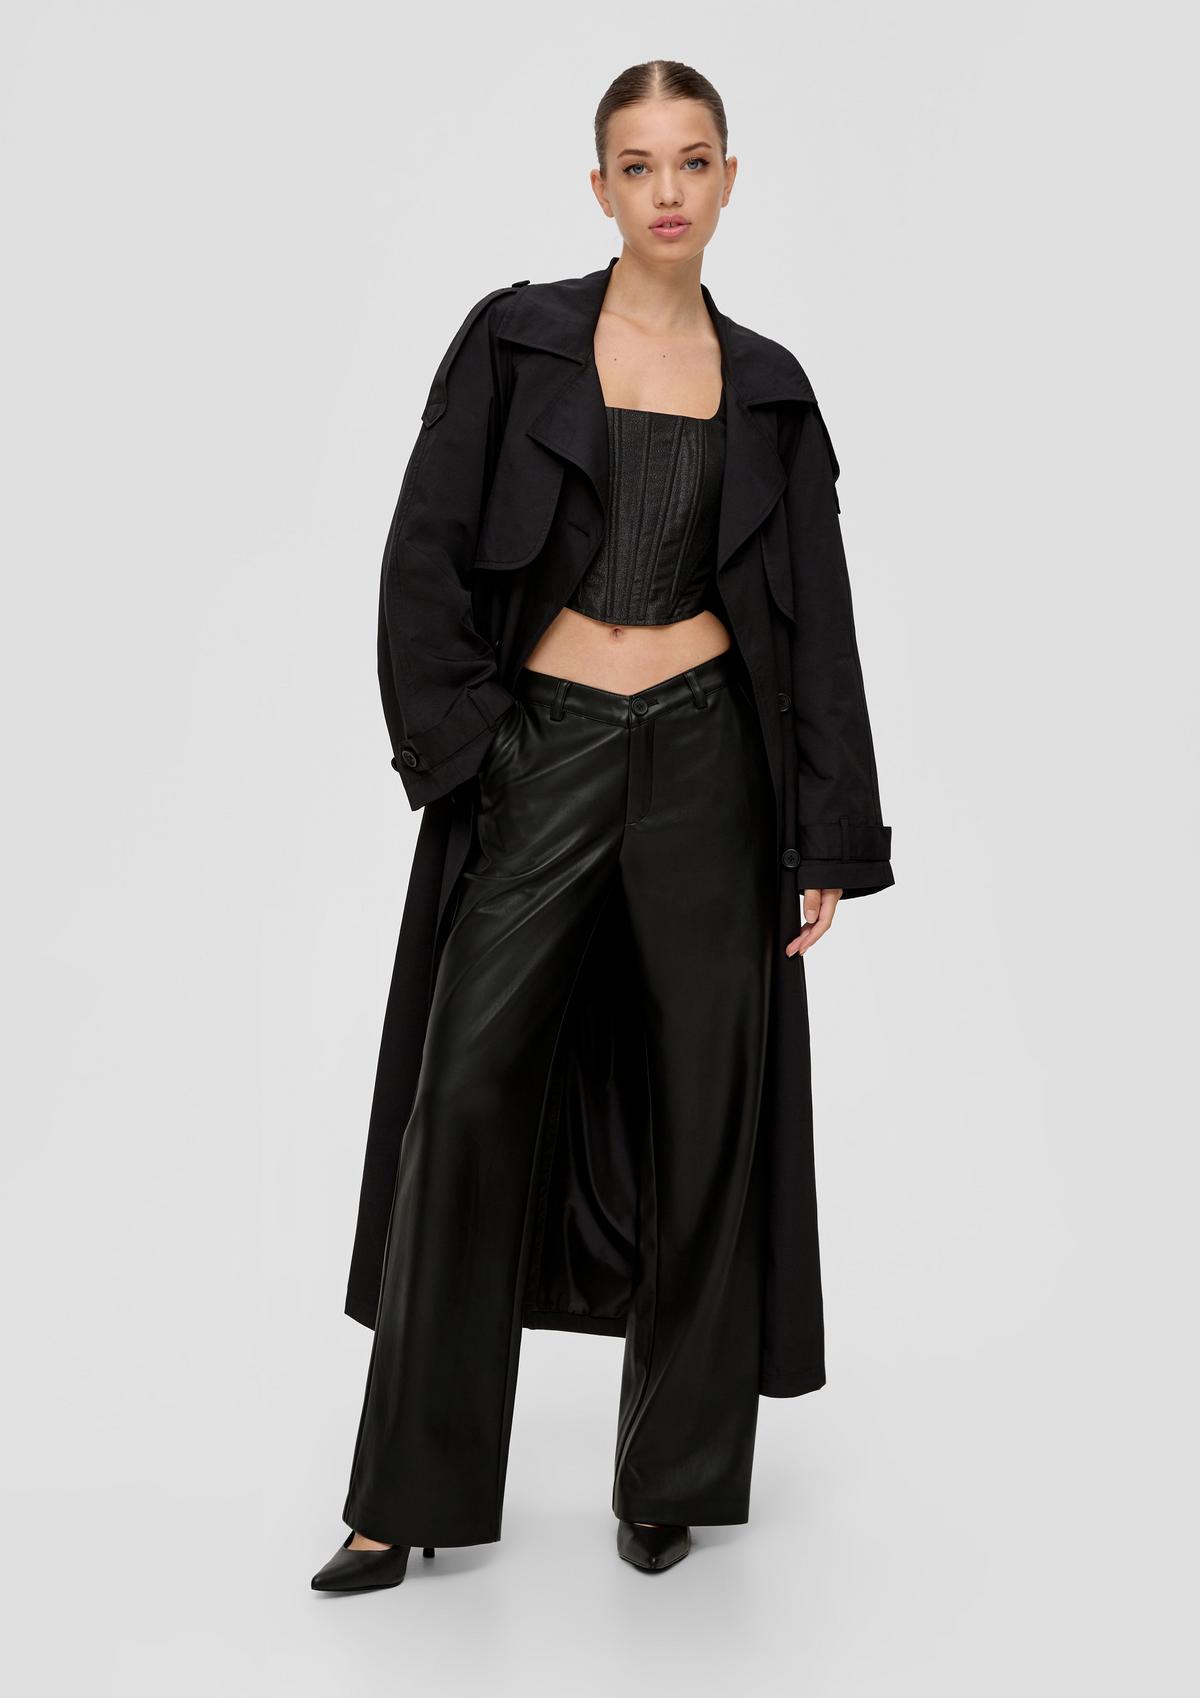 s.Oliver Regular fit: Faux leather trousers | QS x ELIF